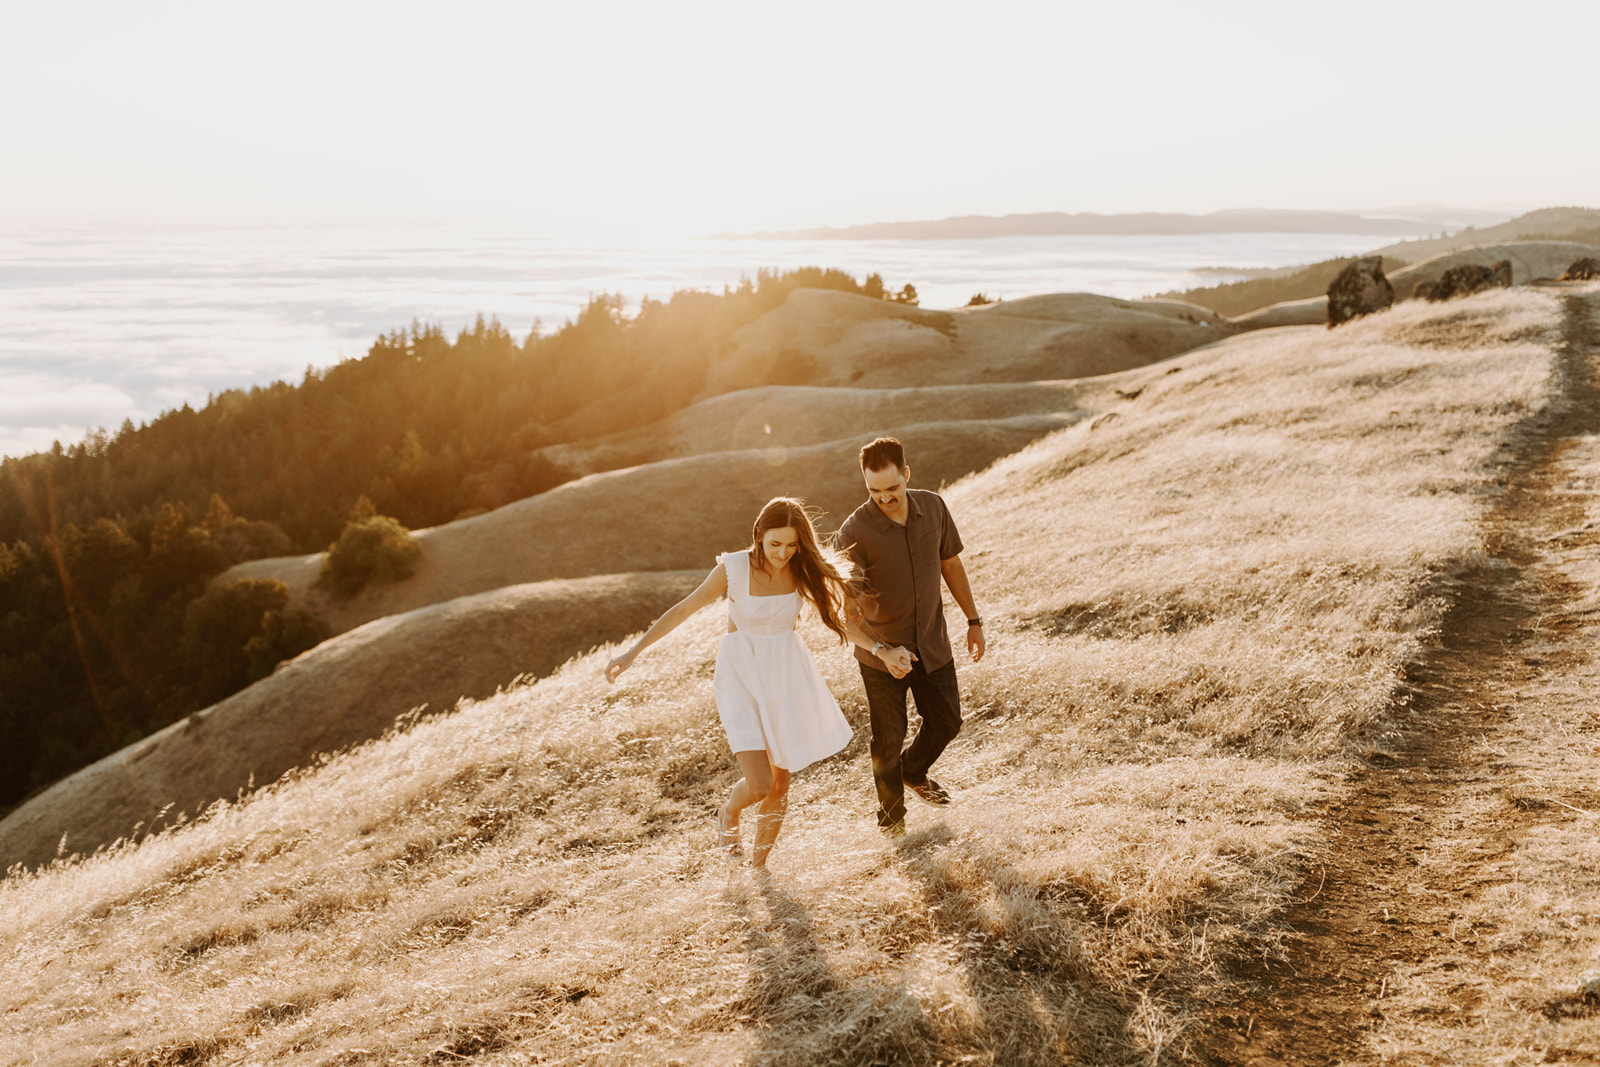 Are you looking for a more dreamy California engagement inspo? Check out these dreamy Mt. Tam Engagement Photos.